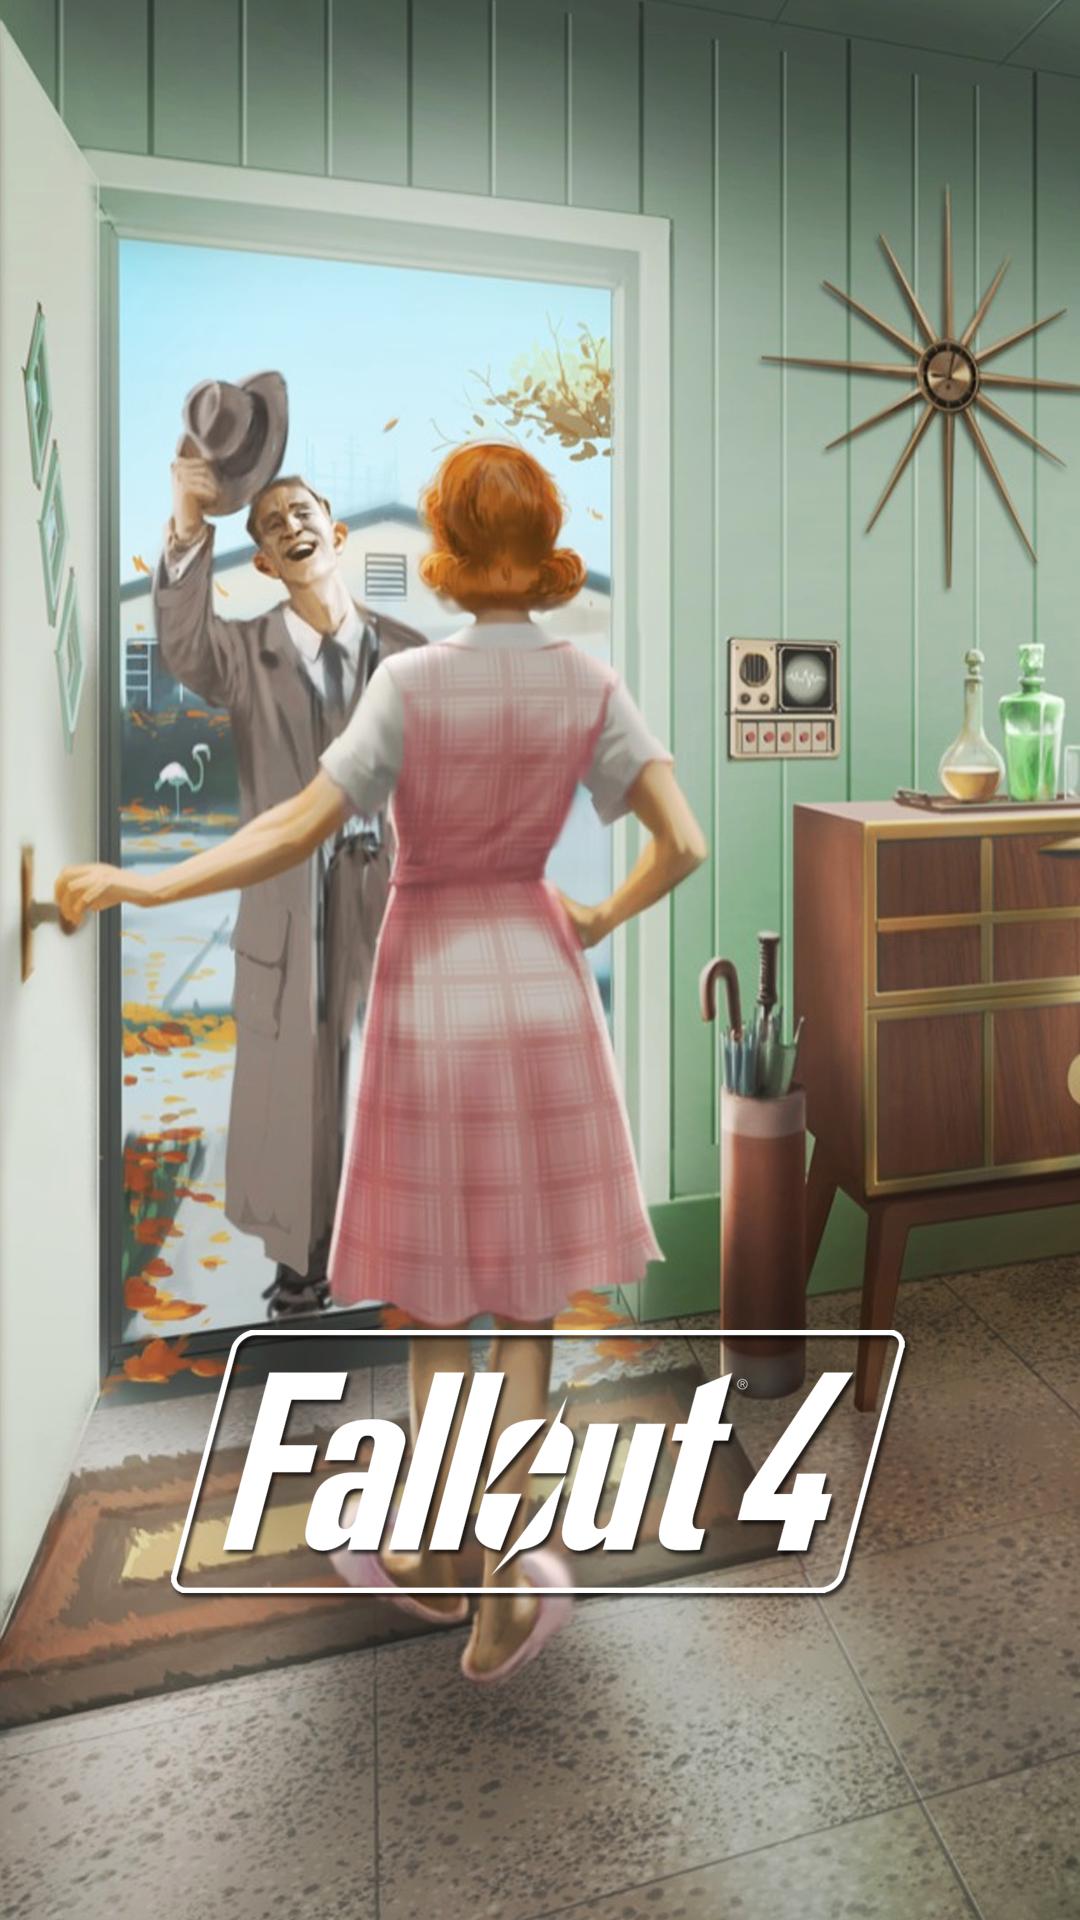 Free Download Fallout 4 Nieuws Prachtige Iphone En Android Wallpapers Voor Fallout 1080x19 For Your Desktop Mobile Tablet Explore 44 Fallout 4 Android Wallpaper Fallout 4 Background Wallpaper Fallout 4 Piper Wallpaper Fallout 4 Wasteland